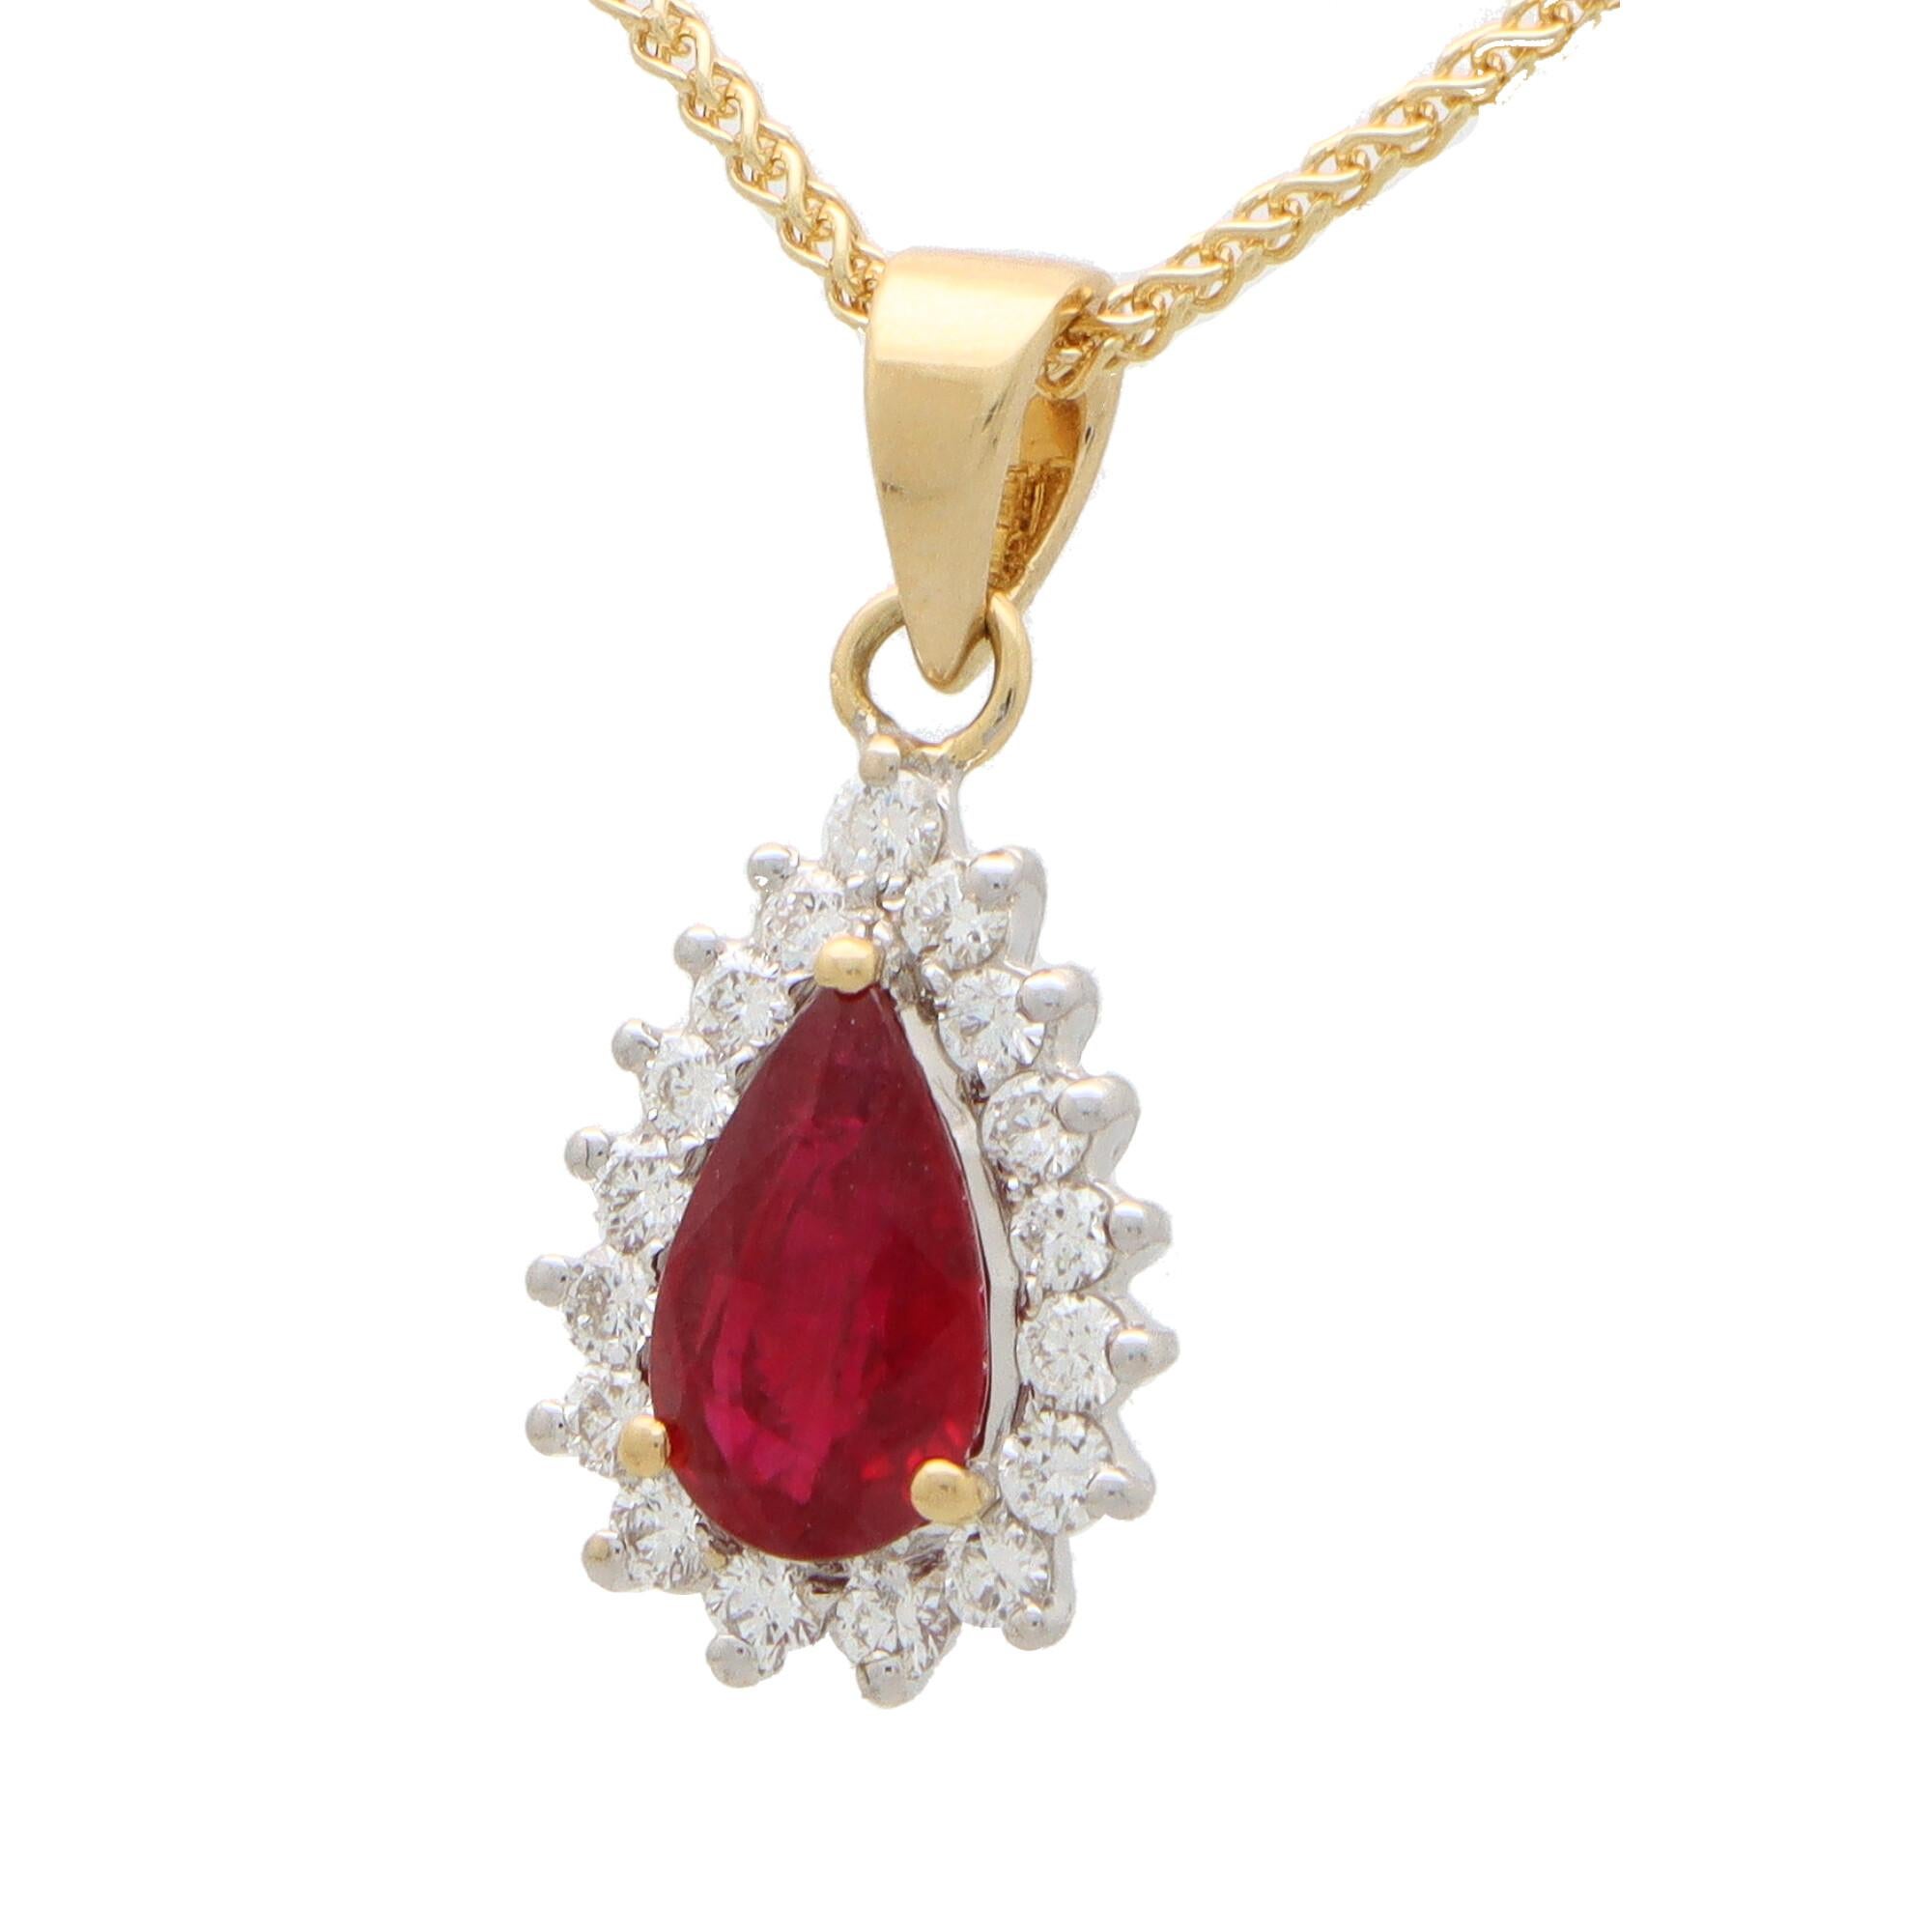 A beautiful pear shape ruby and diamond cluster pendant set in 18k yellow gold.

The pendant is centrally set with a beautiful coloured red pear cut ruby which is surrounded by 17 sparkly round brilliant cut diamonds. The pendant hangs from a